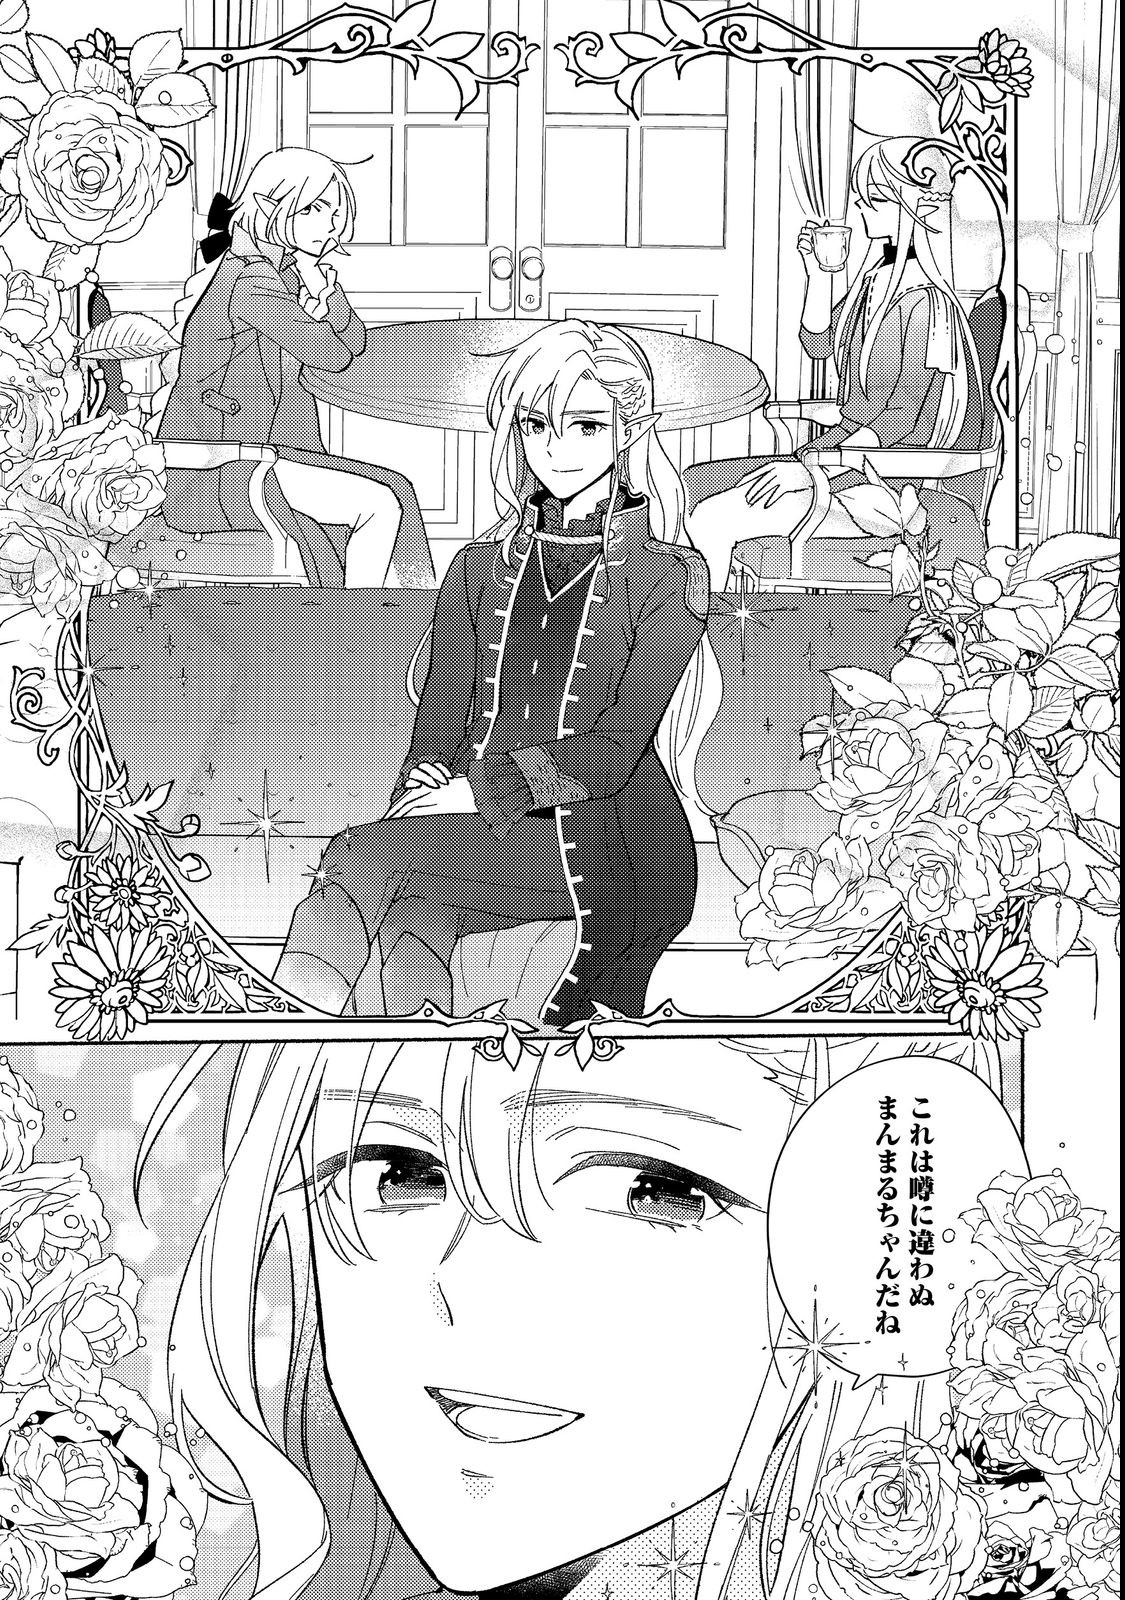 I’m the White Pig Nobleman 第17.1話 - Page 5